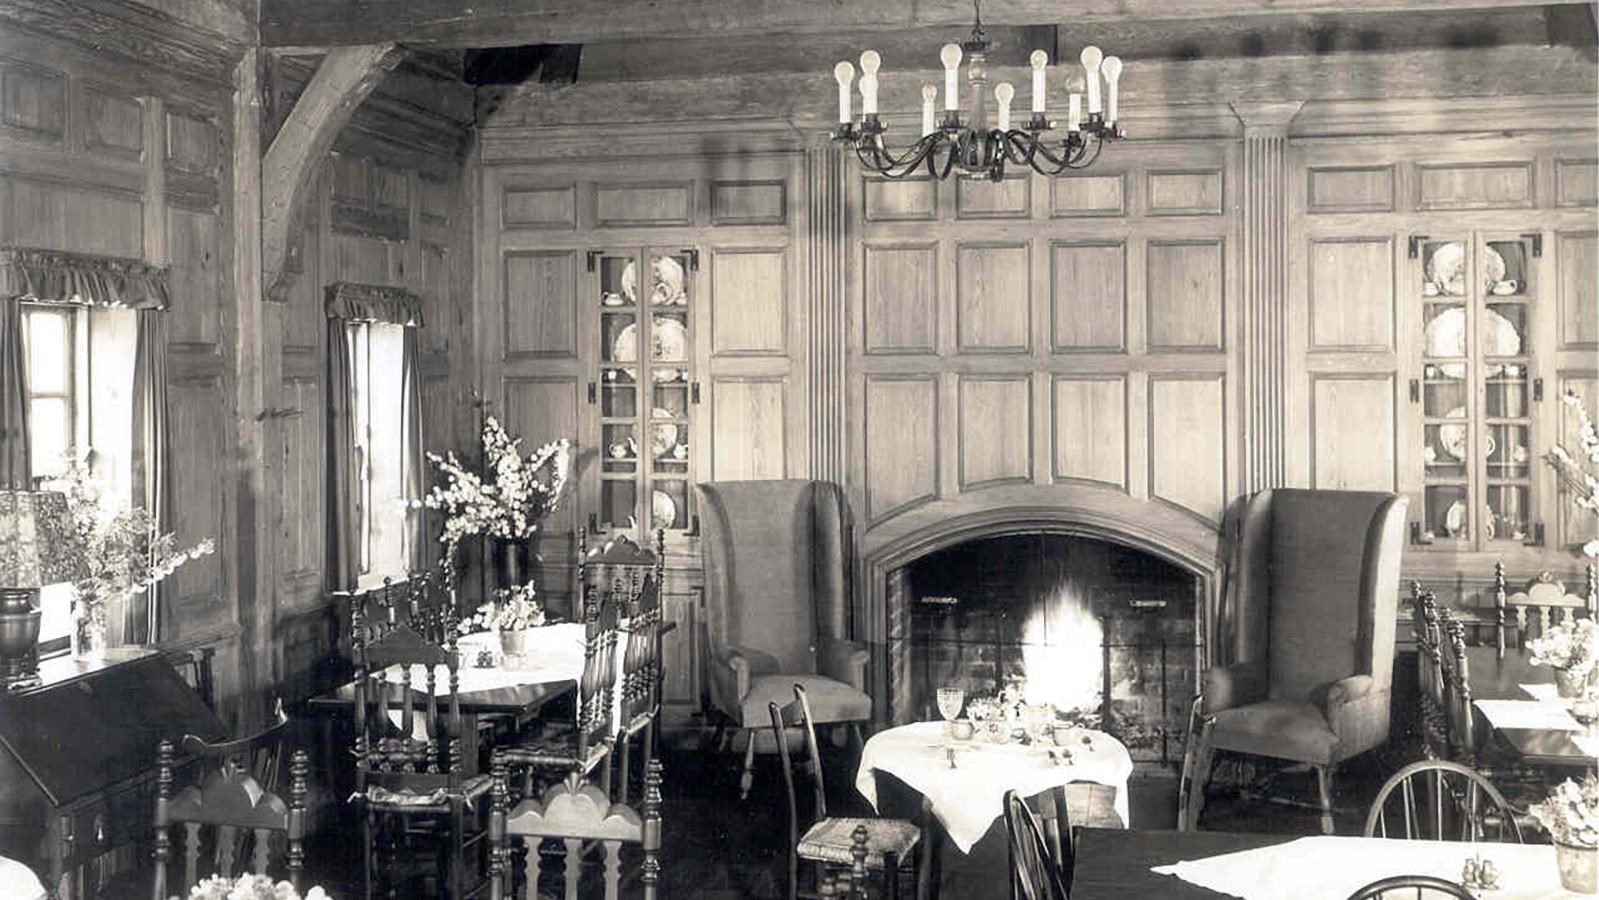 Interior image from 1930s of the Log House